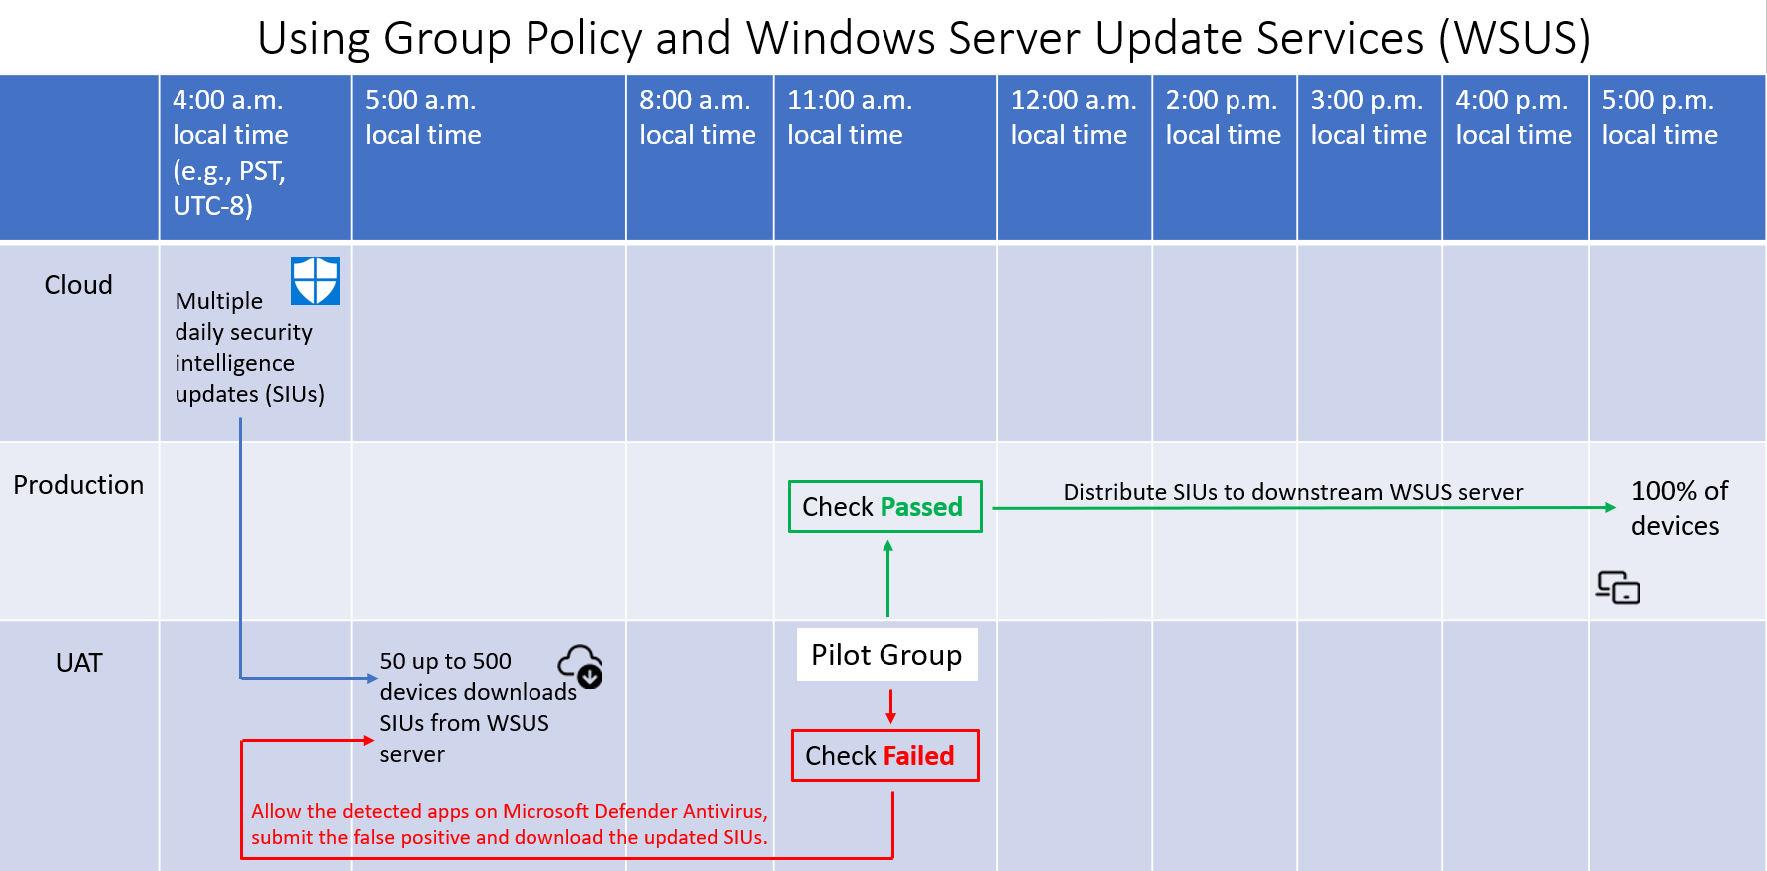 Screenshot that shows an example ring deployment schedule for Group Policy with WSUS environments.